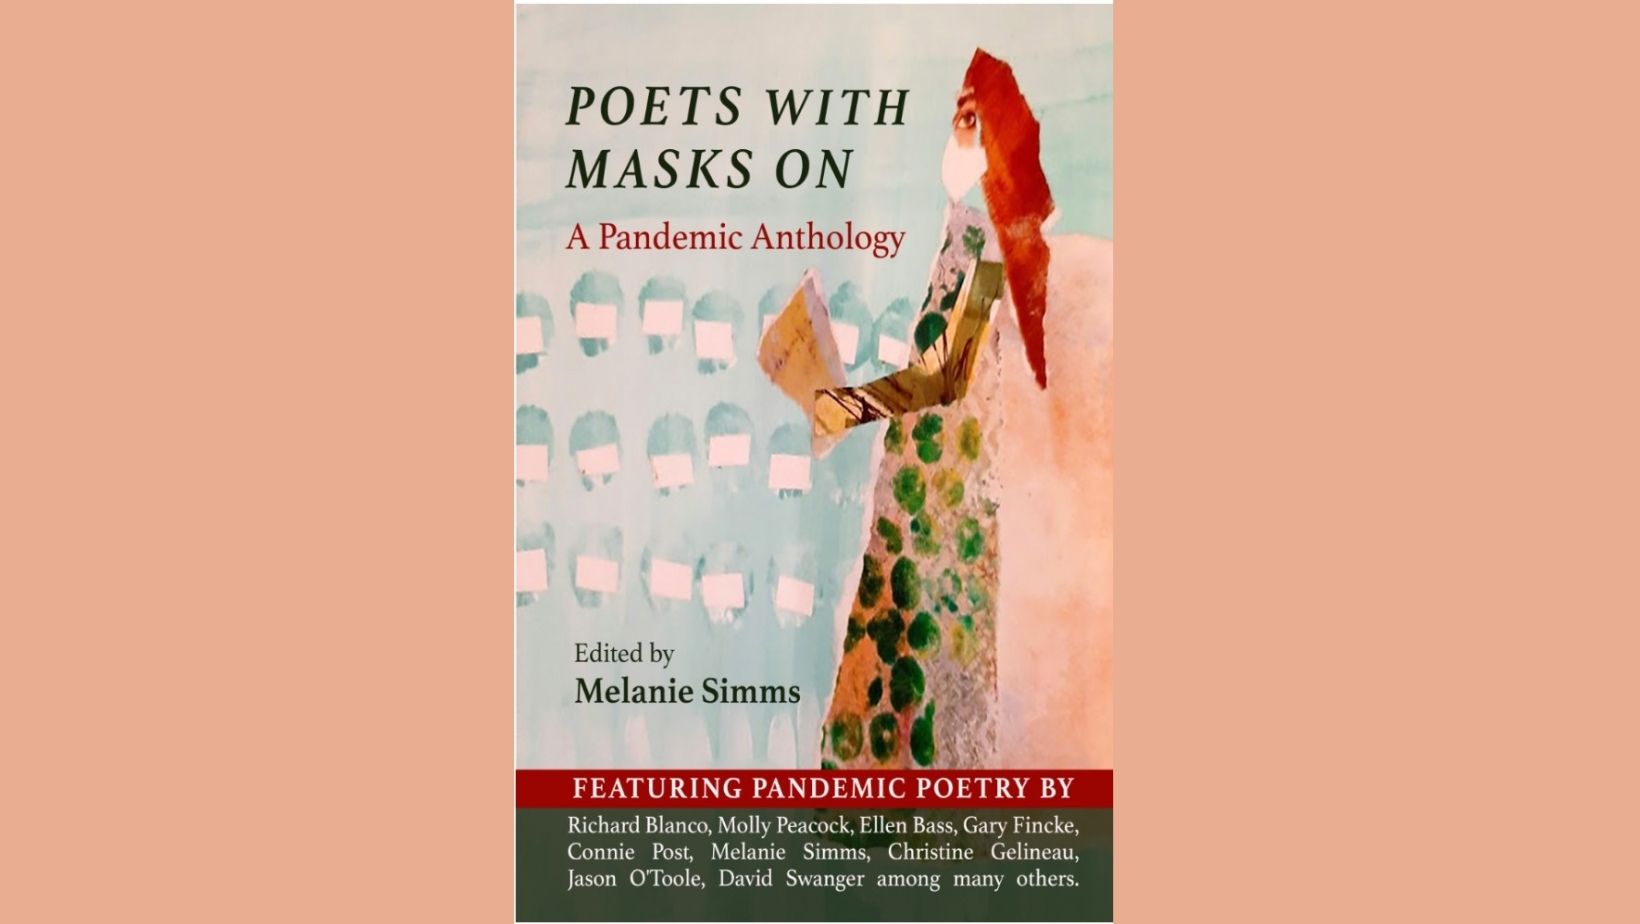 Congrats to Jason O’Toole for inclusion in anthology, Poets with Masks On